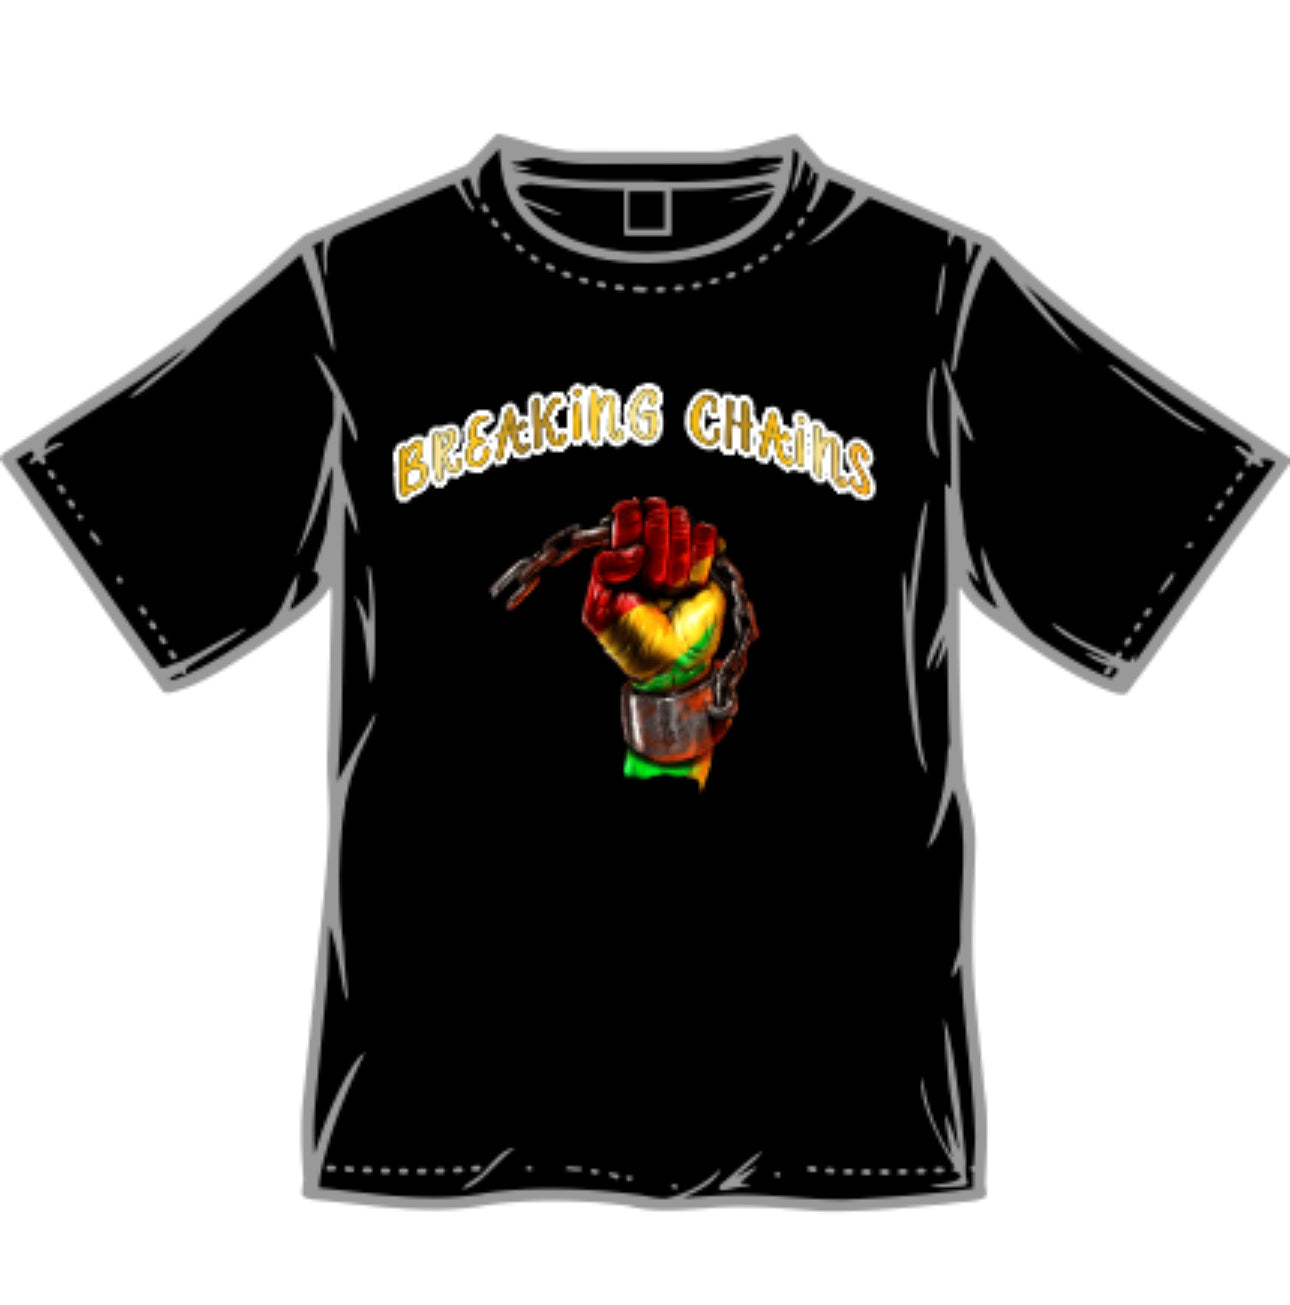 Limited Edition “BREAKING CHAINS” Juneteenth Shirts